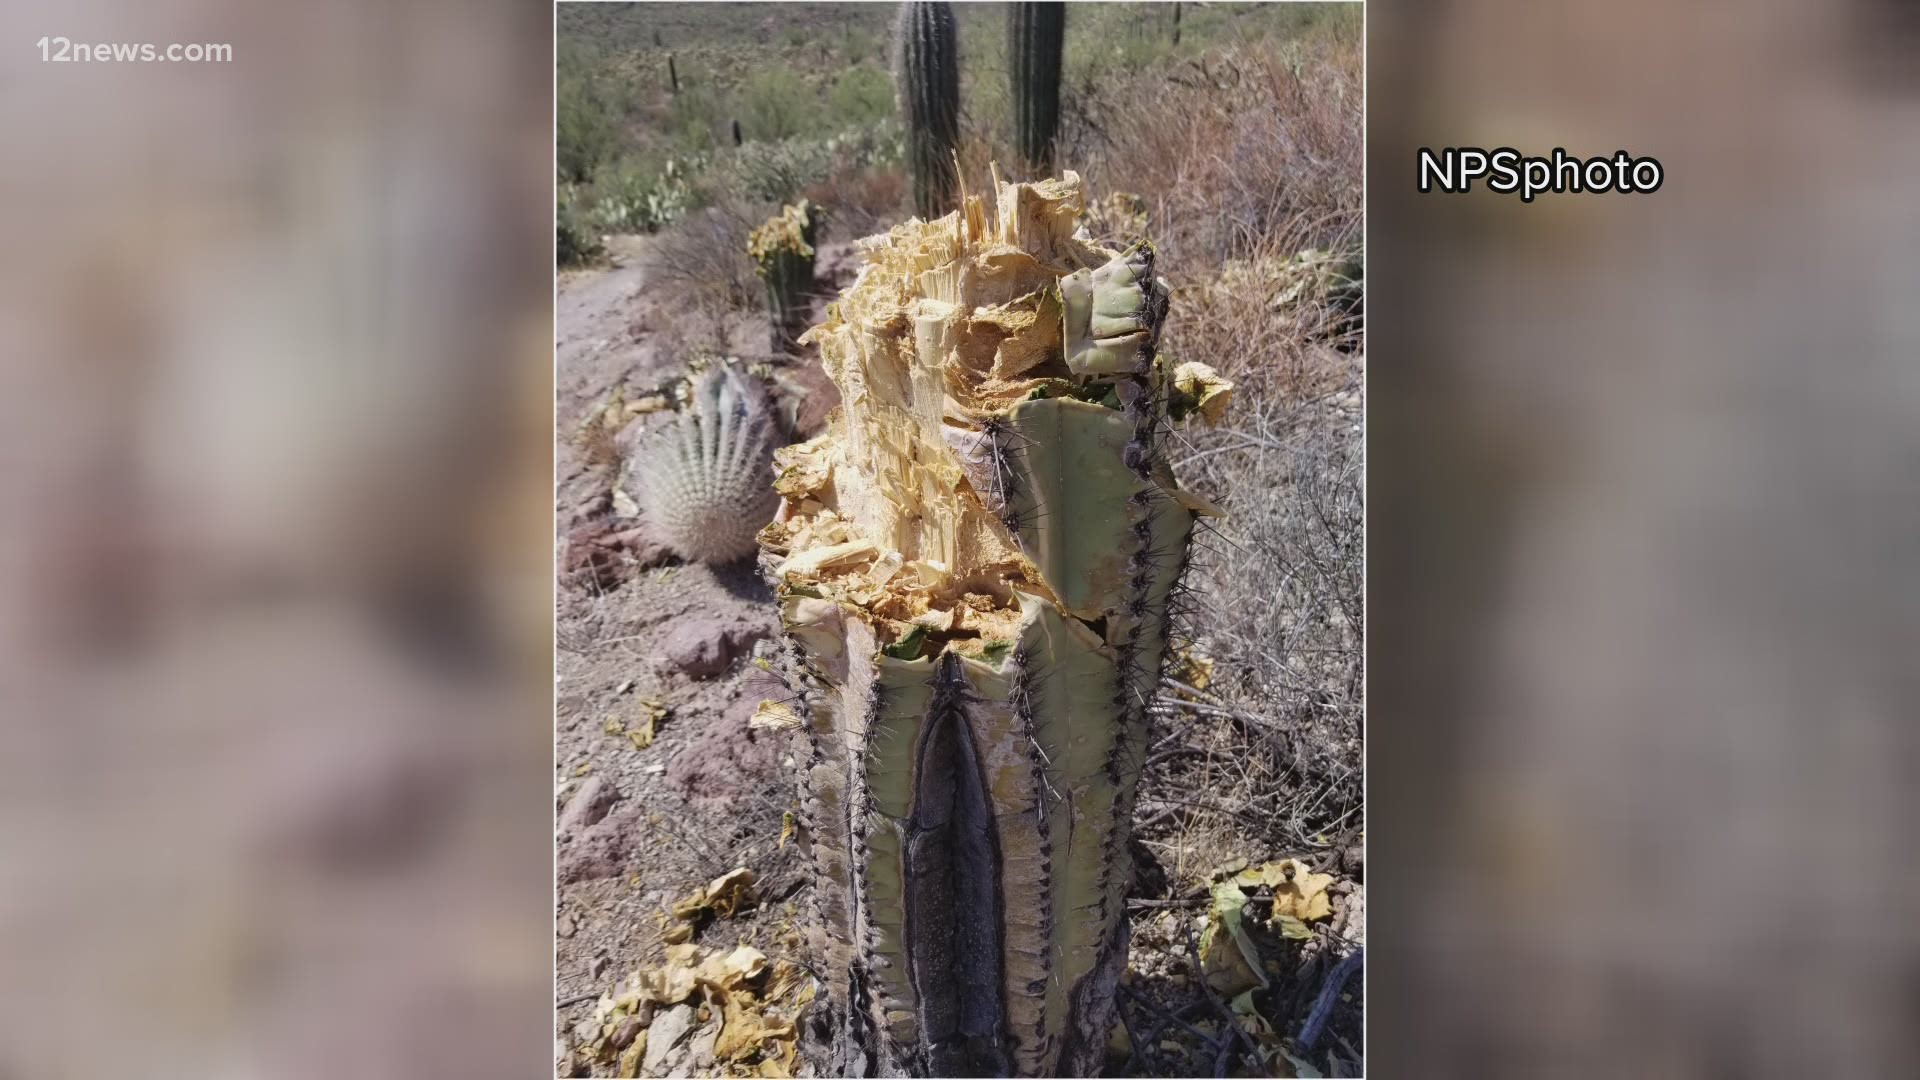 The saguaro cactus is synonymous with Arizona, but some vandals in Tucson cut down at least eight leaving rangers devastated.